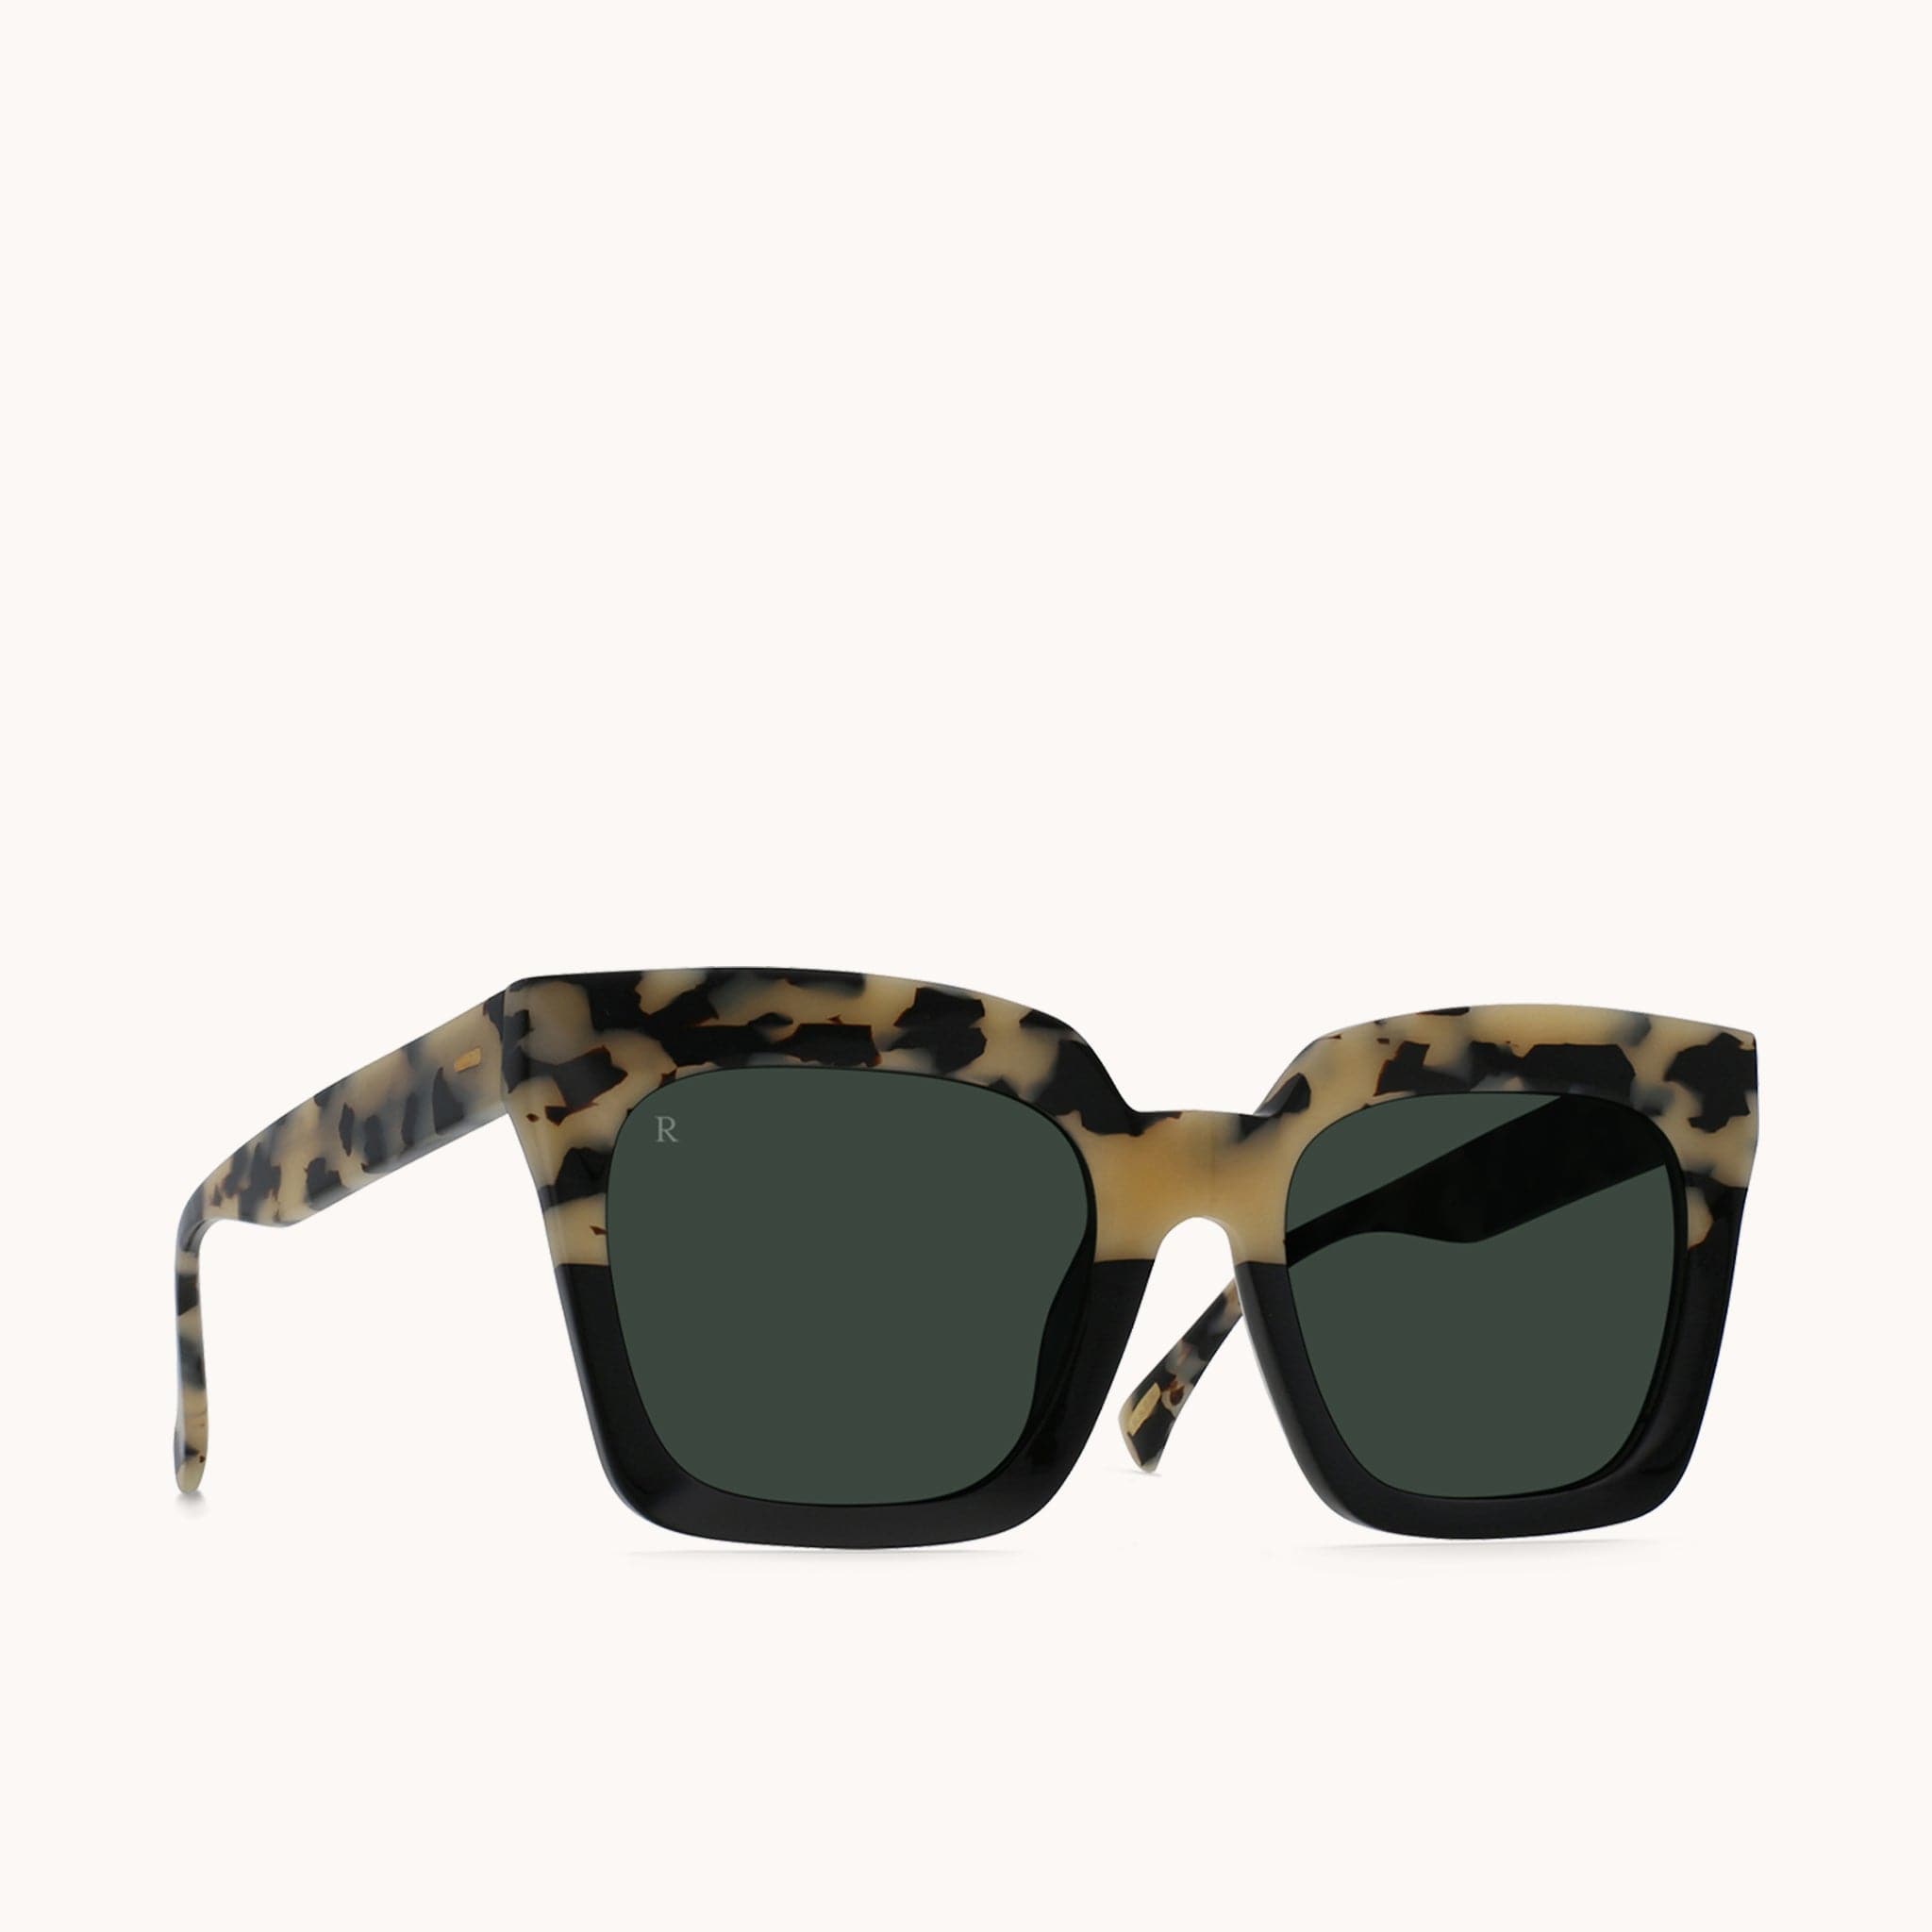 Sedona framed sunglasses with two-toned tortoise and solid black frames made of high quality acetate. The arms are a tortoise print of the same material. These glasses have a distinct, oversized look from their thick frames and round, squared and dark smoke toned lenses.